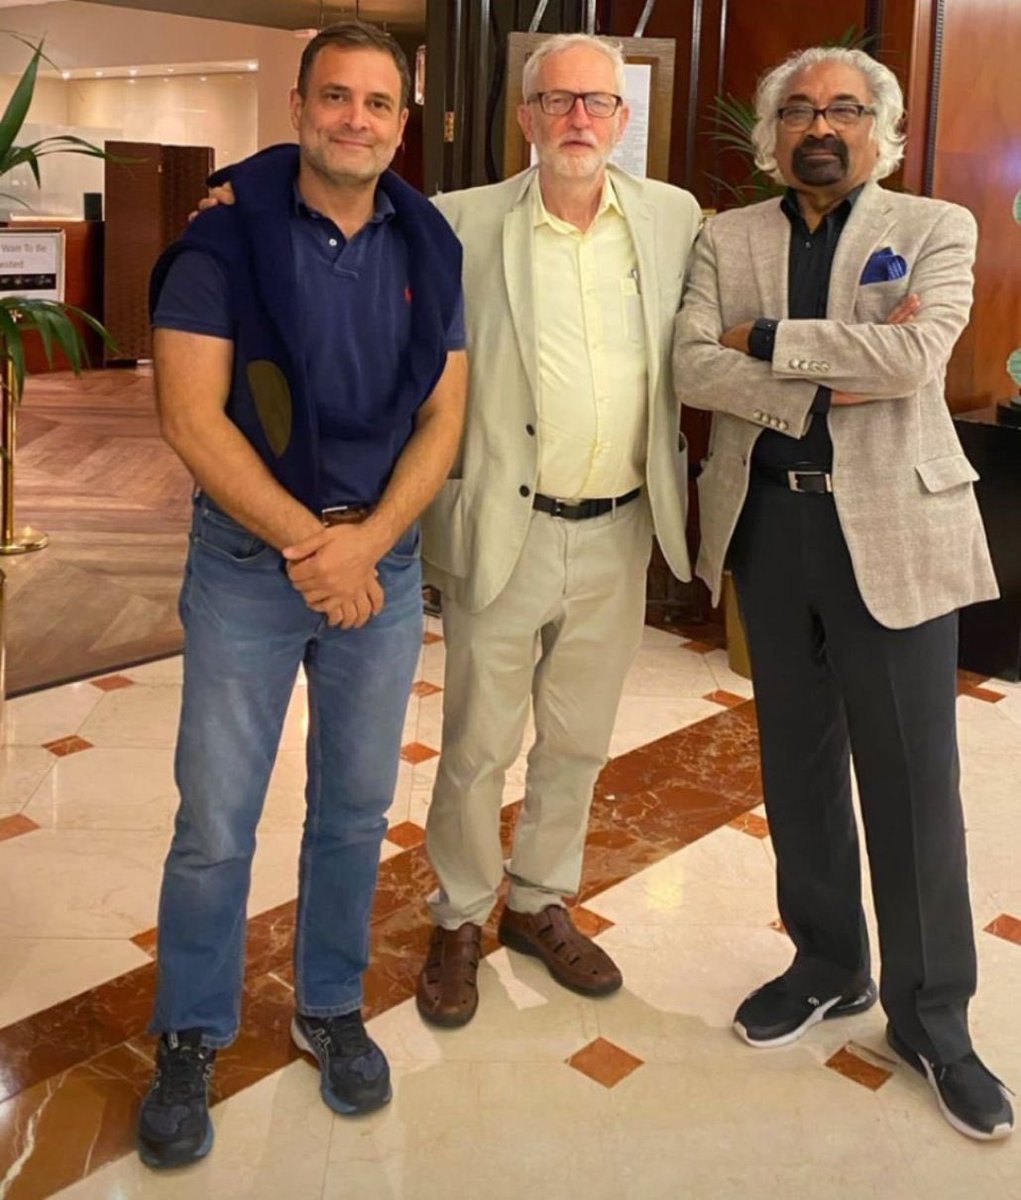 Rahul Gandhi with UK MP and Labour leader Jeremy Corbyn.

Jeremy is known for his visceral dislike for India, advocates Kashmir’s secession and is unequivocally anti-Hindu.

Gandhi has finally found his overseas collaborator, who denigrates India with the same impunity as him.